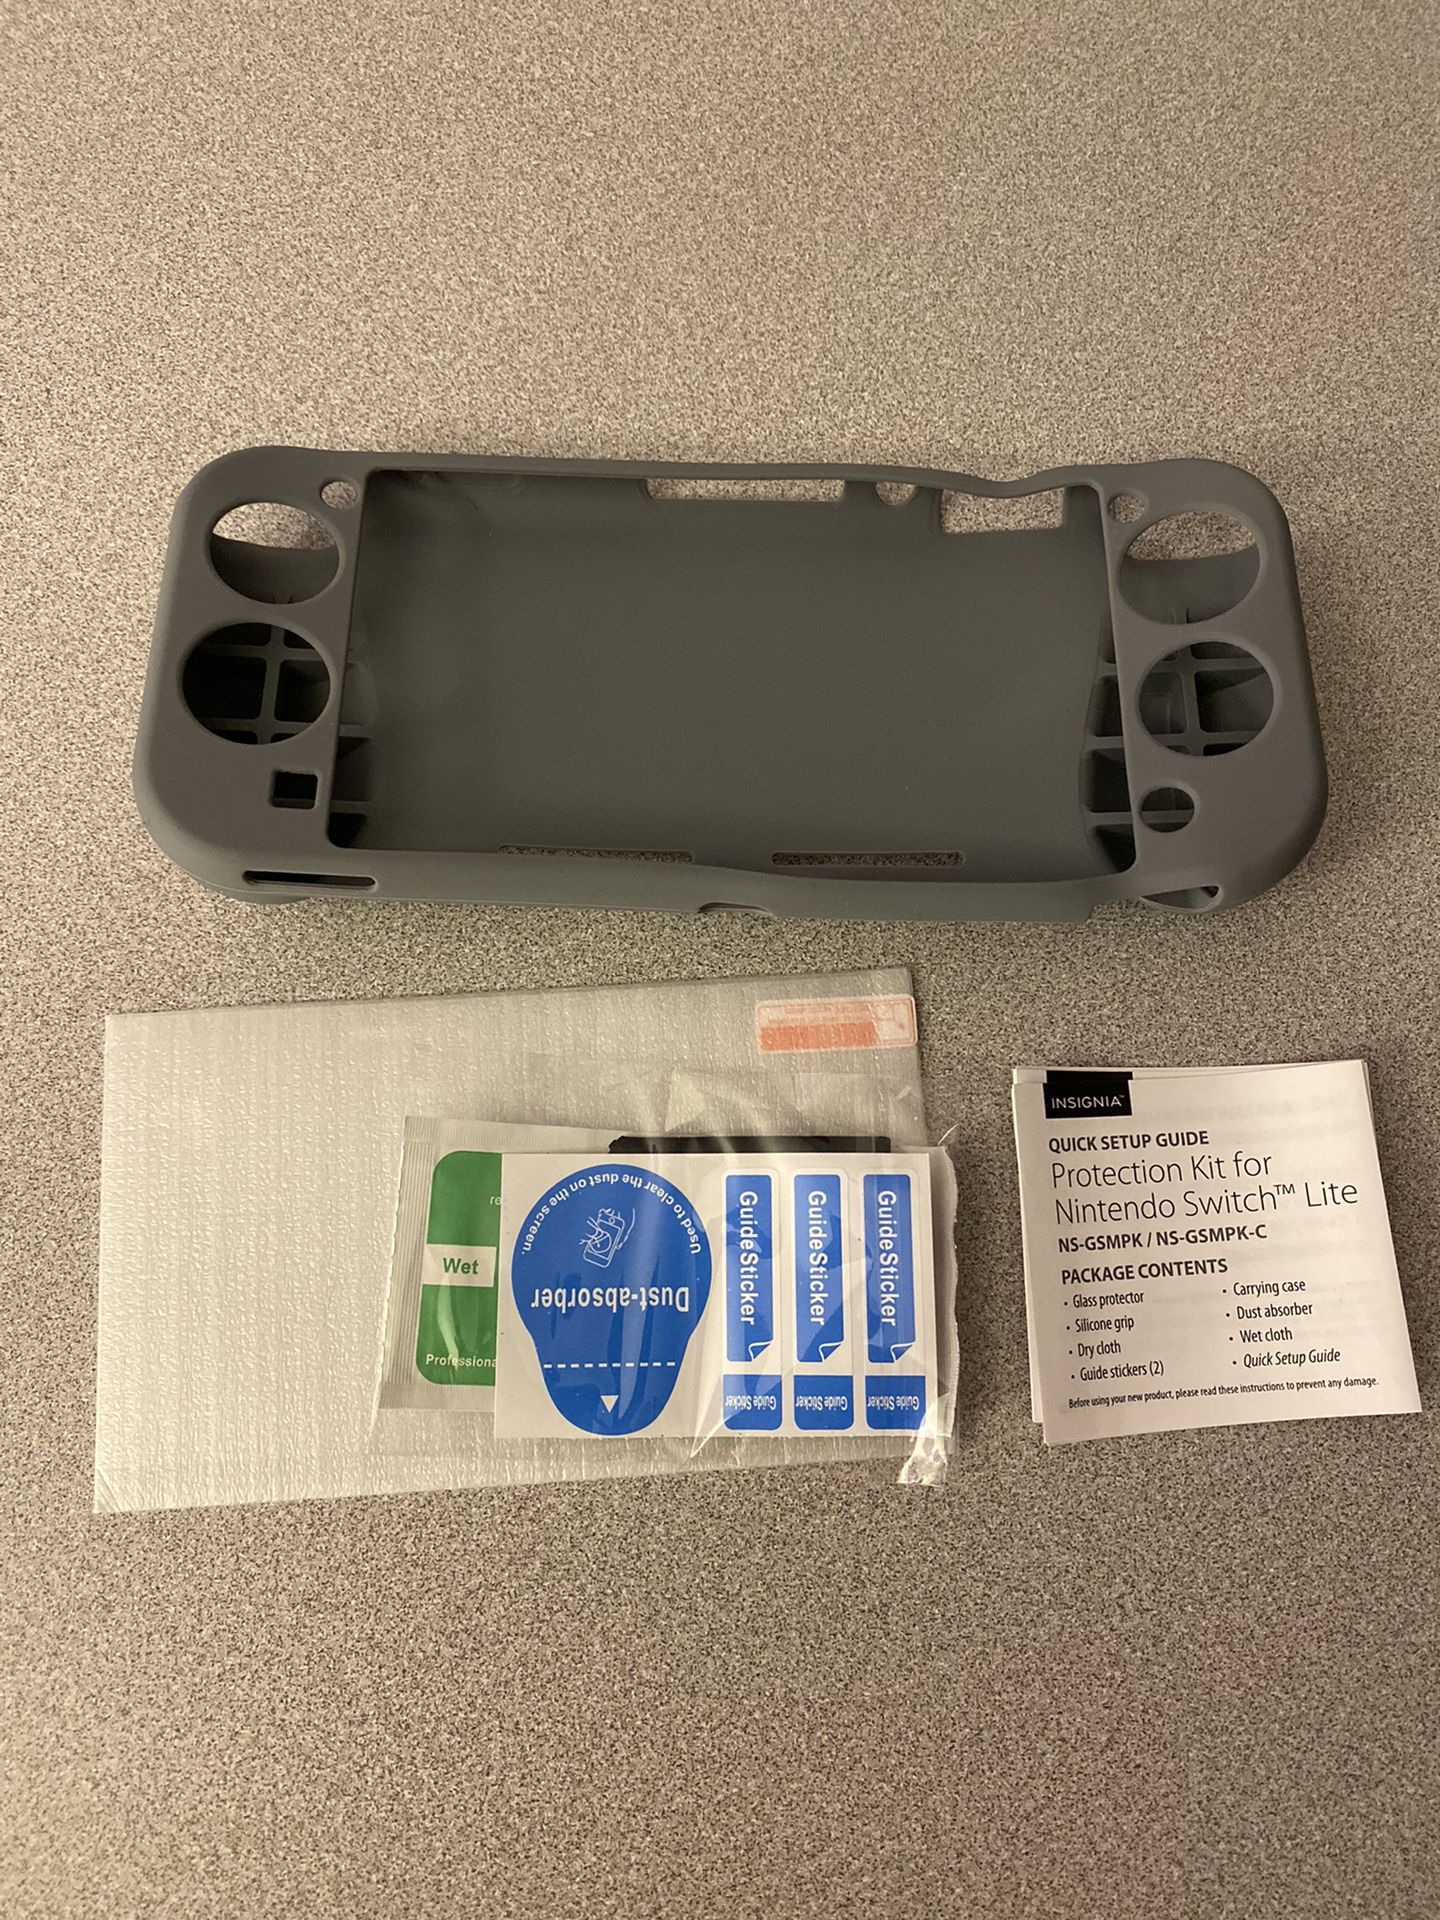 Brand new grip case and glass screen protector for Nintendo switch lite brand new perfect!